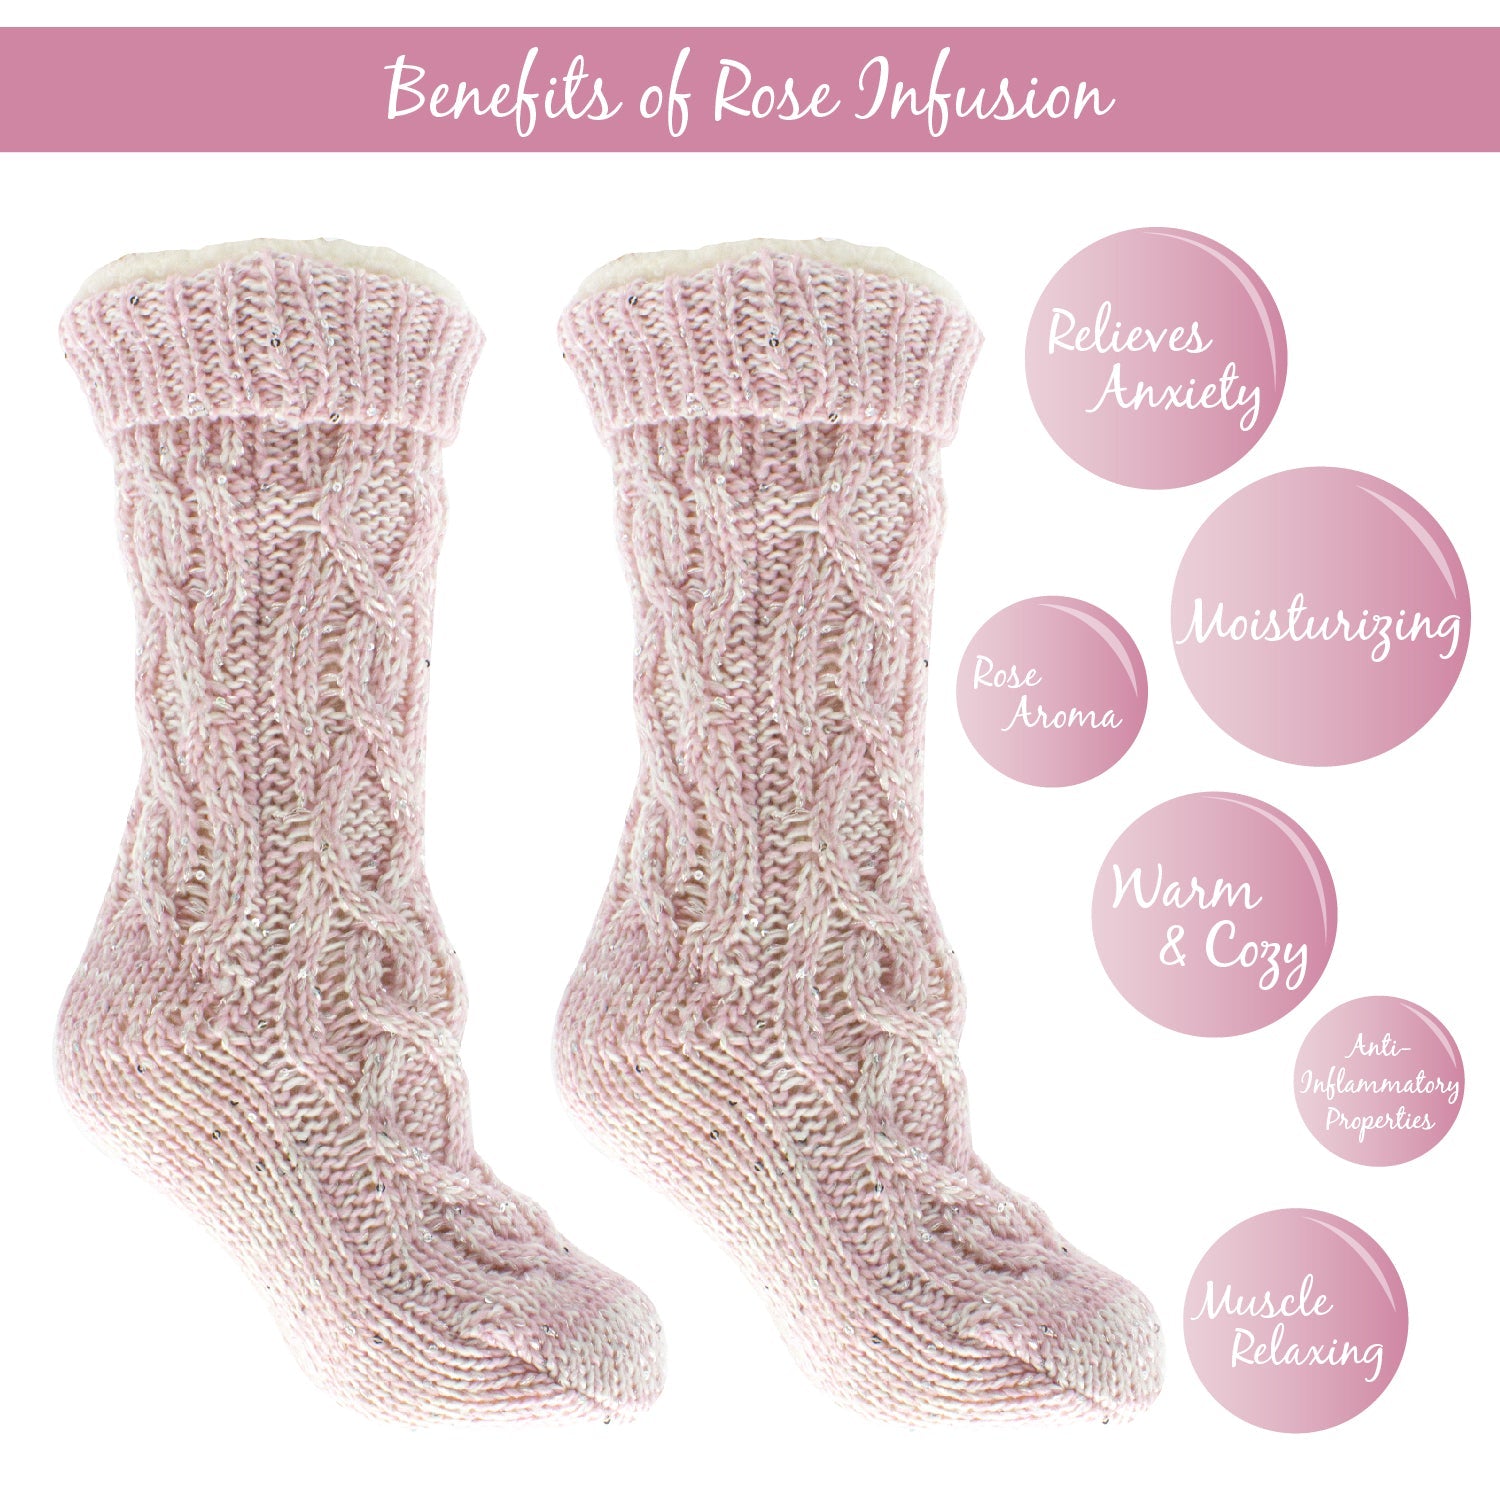 Lakeside Lounge Socks With Shea Butter and Rose Oil Infused